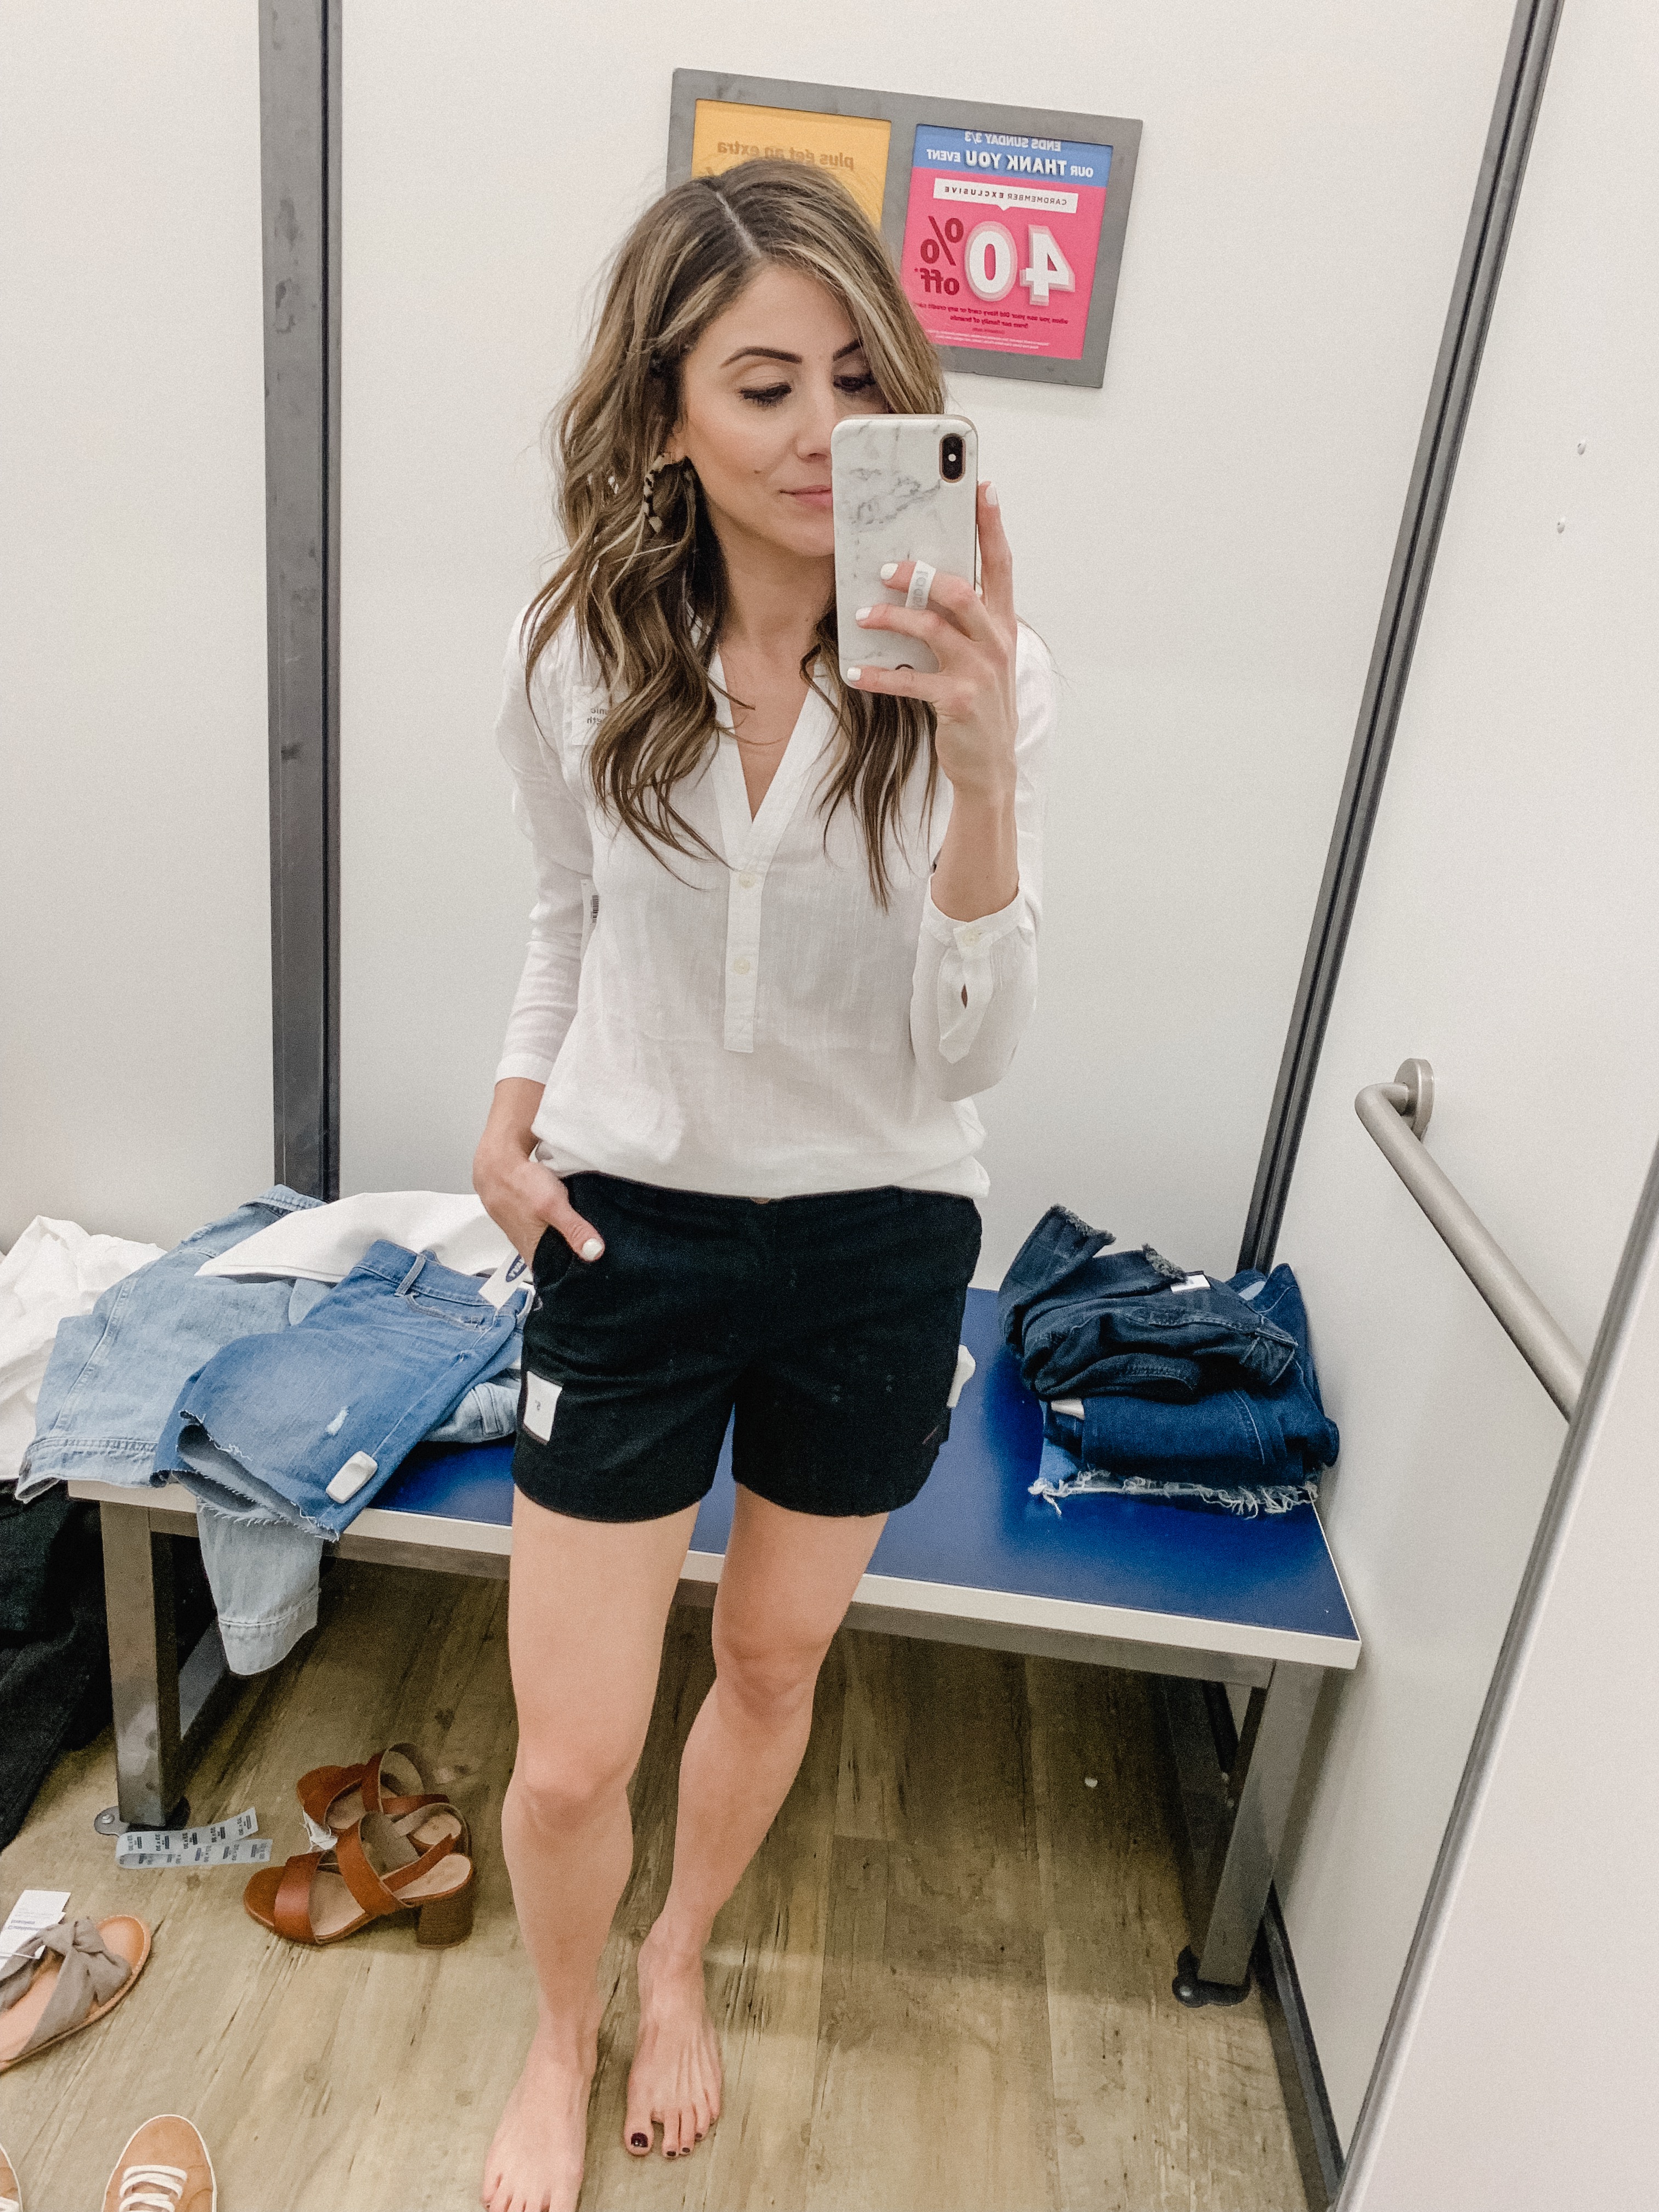 Connecticut life and style blogger Lauren McBride shares a March Old Navy try on featuring spring staples that will maximize your wardrobe.